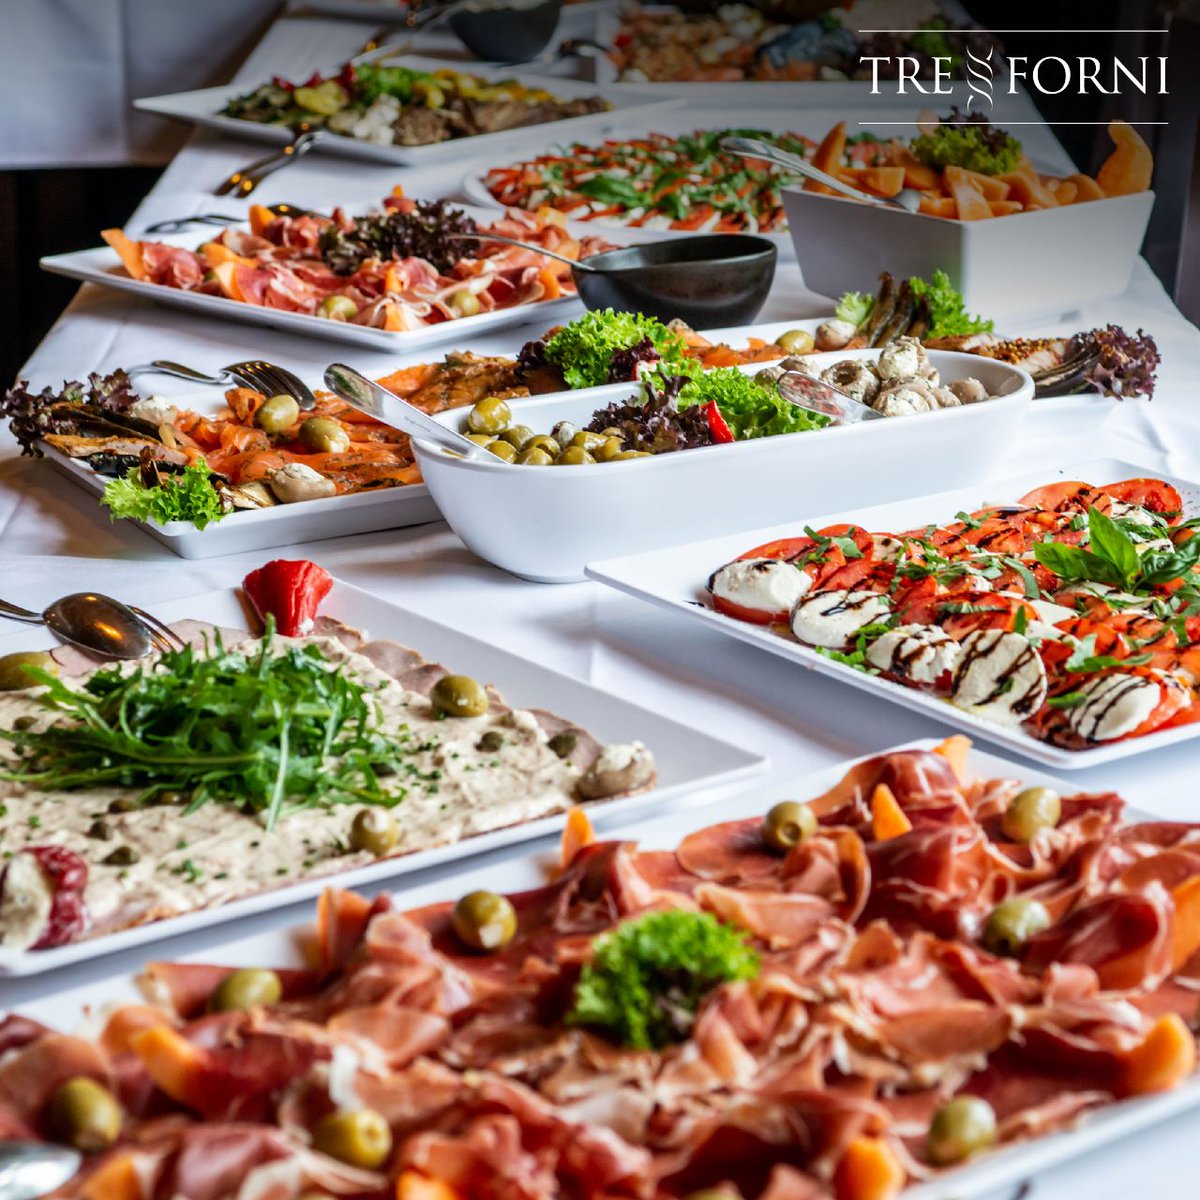 Sundays are for brunches!
Experience our signature dishes and specially curated spirits at Tre-Forni.

Call now for reservations.
7702202519 or 49491222
Visit >>> bit.ly/3XNiDZE

#sundaybrunch #kidsbrunch #parkhyatthyderabad #treforni #italianfood #italiancuisine